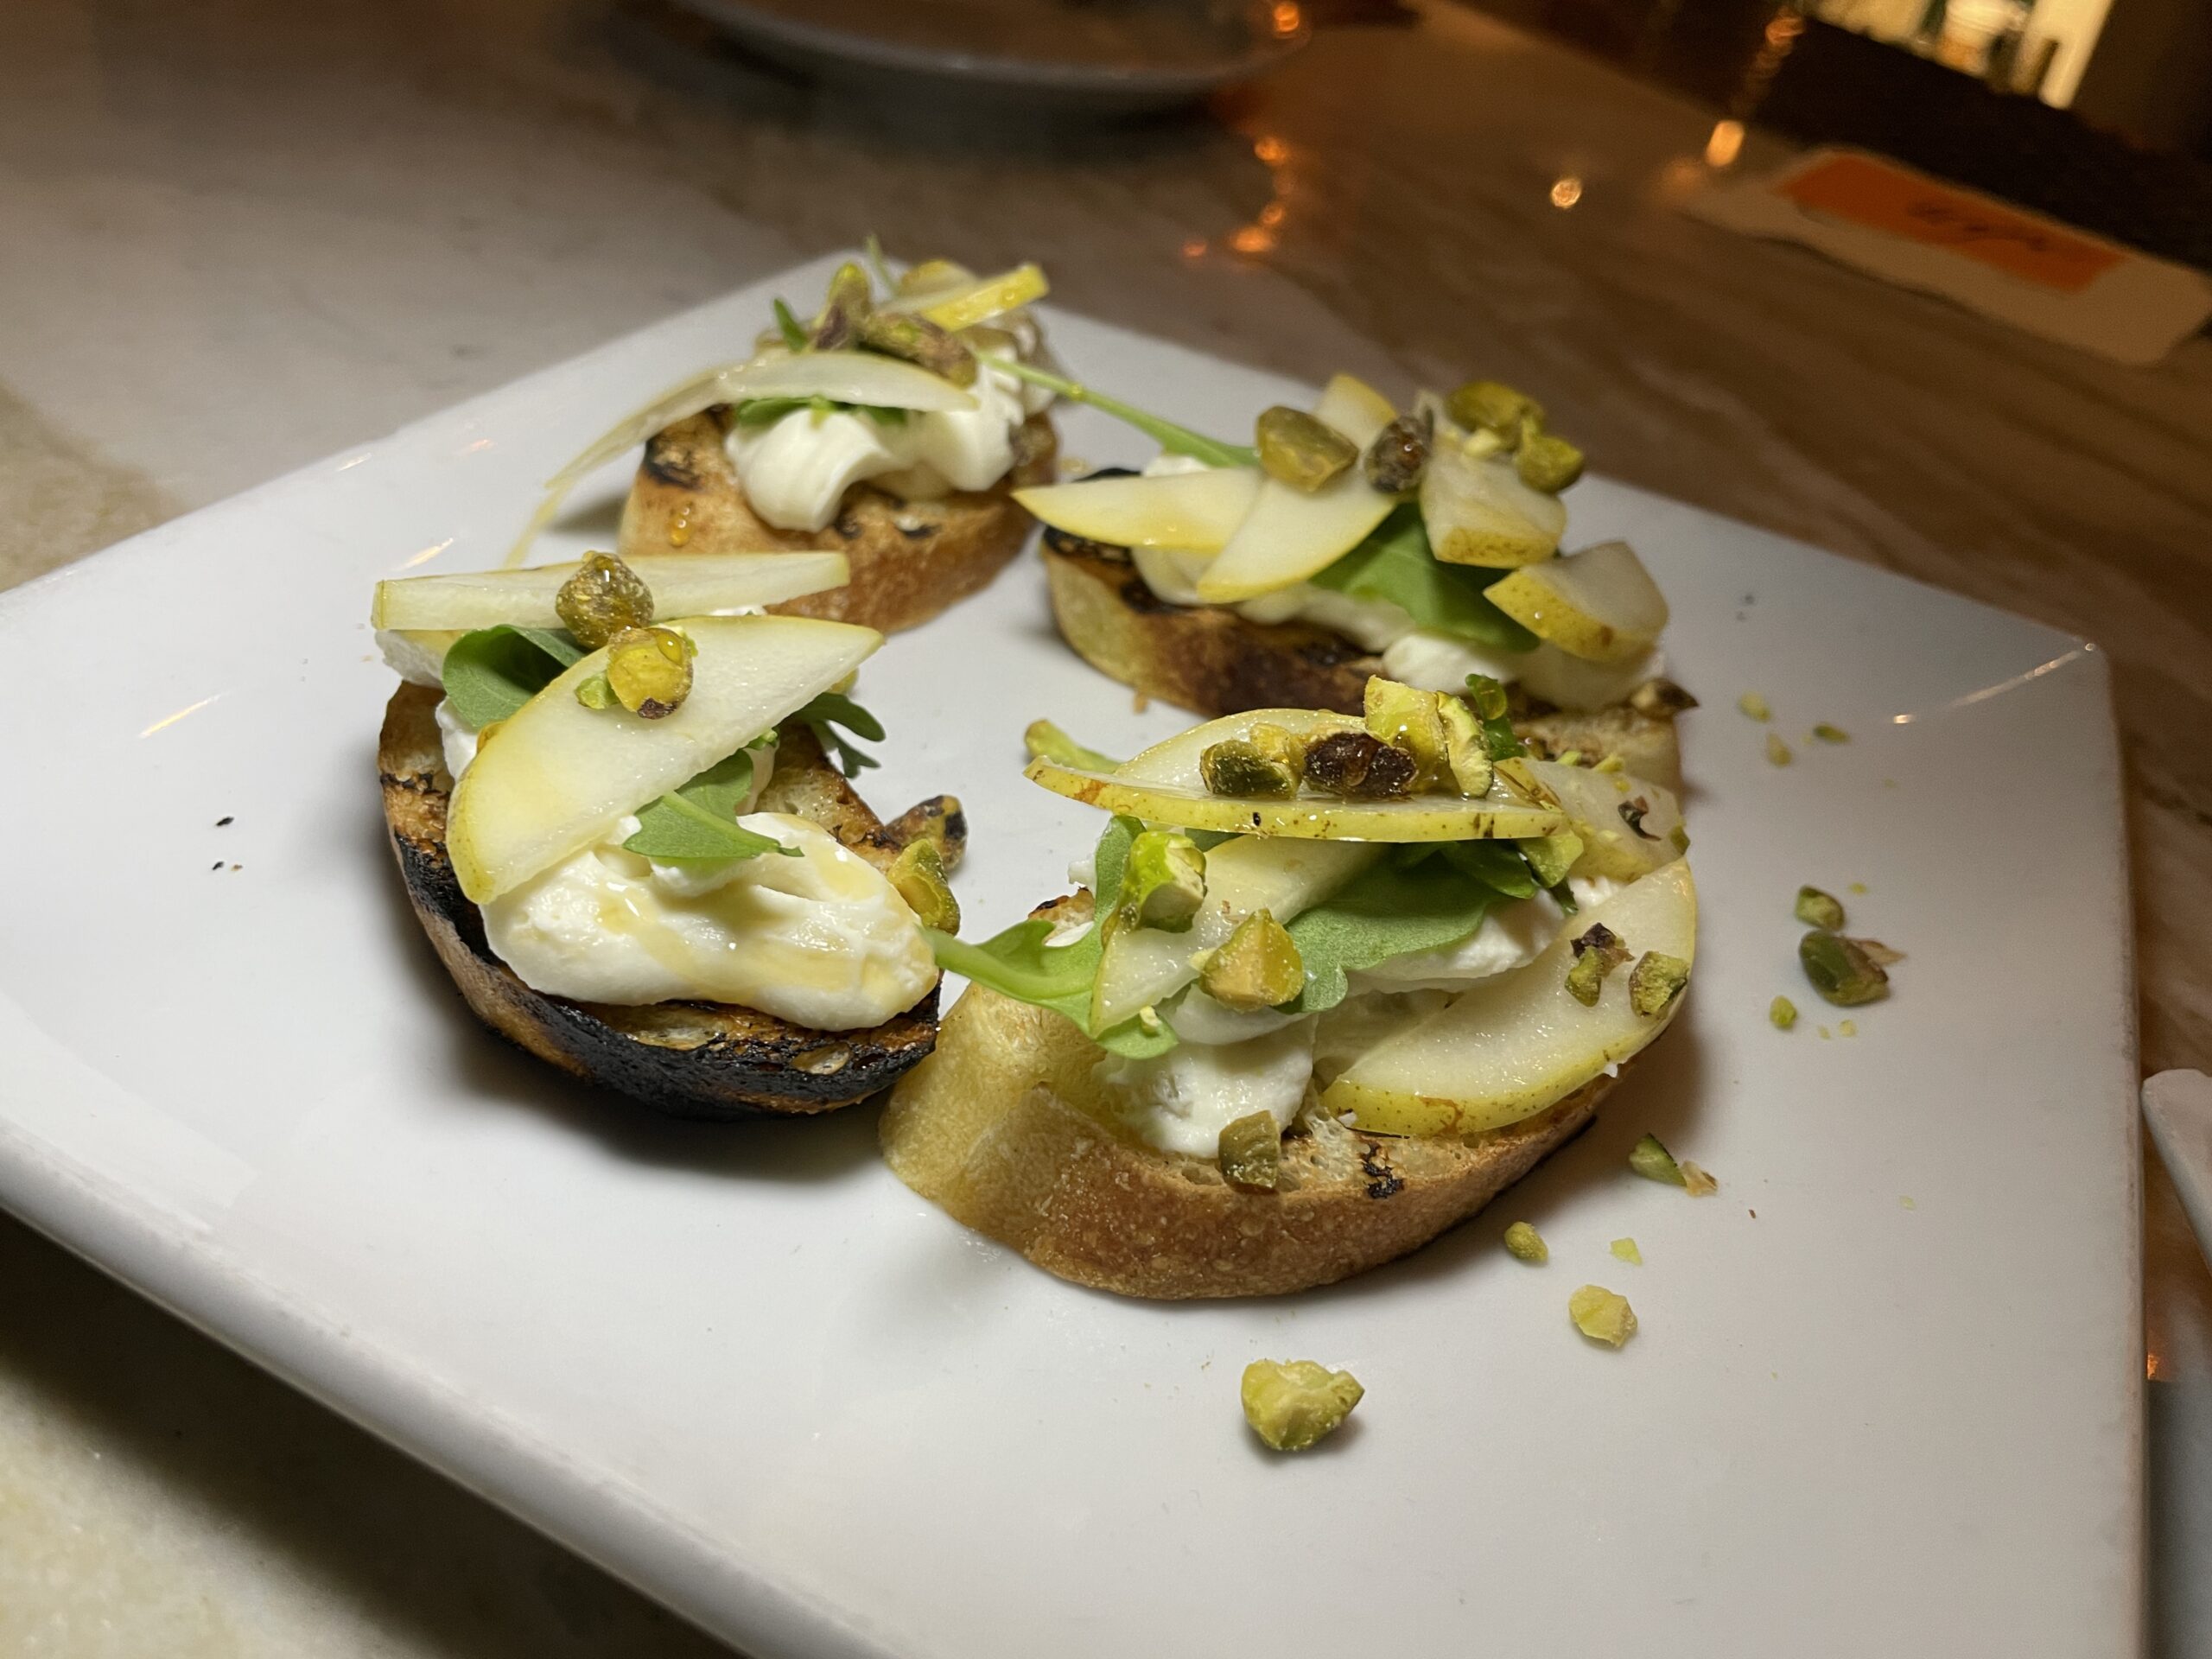 The Lounge at Ugo's menu offers Italian dishes composed of fresh and homemade flavorful ingredients. I recommend starting with appetizers such as the Ricotta Crostini (crostini spread with whipped ricotta, pear slice, and pistachios).